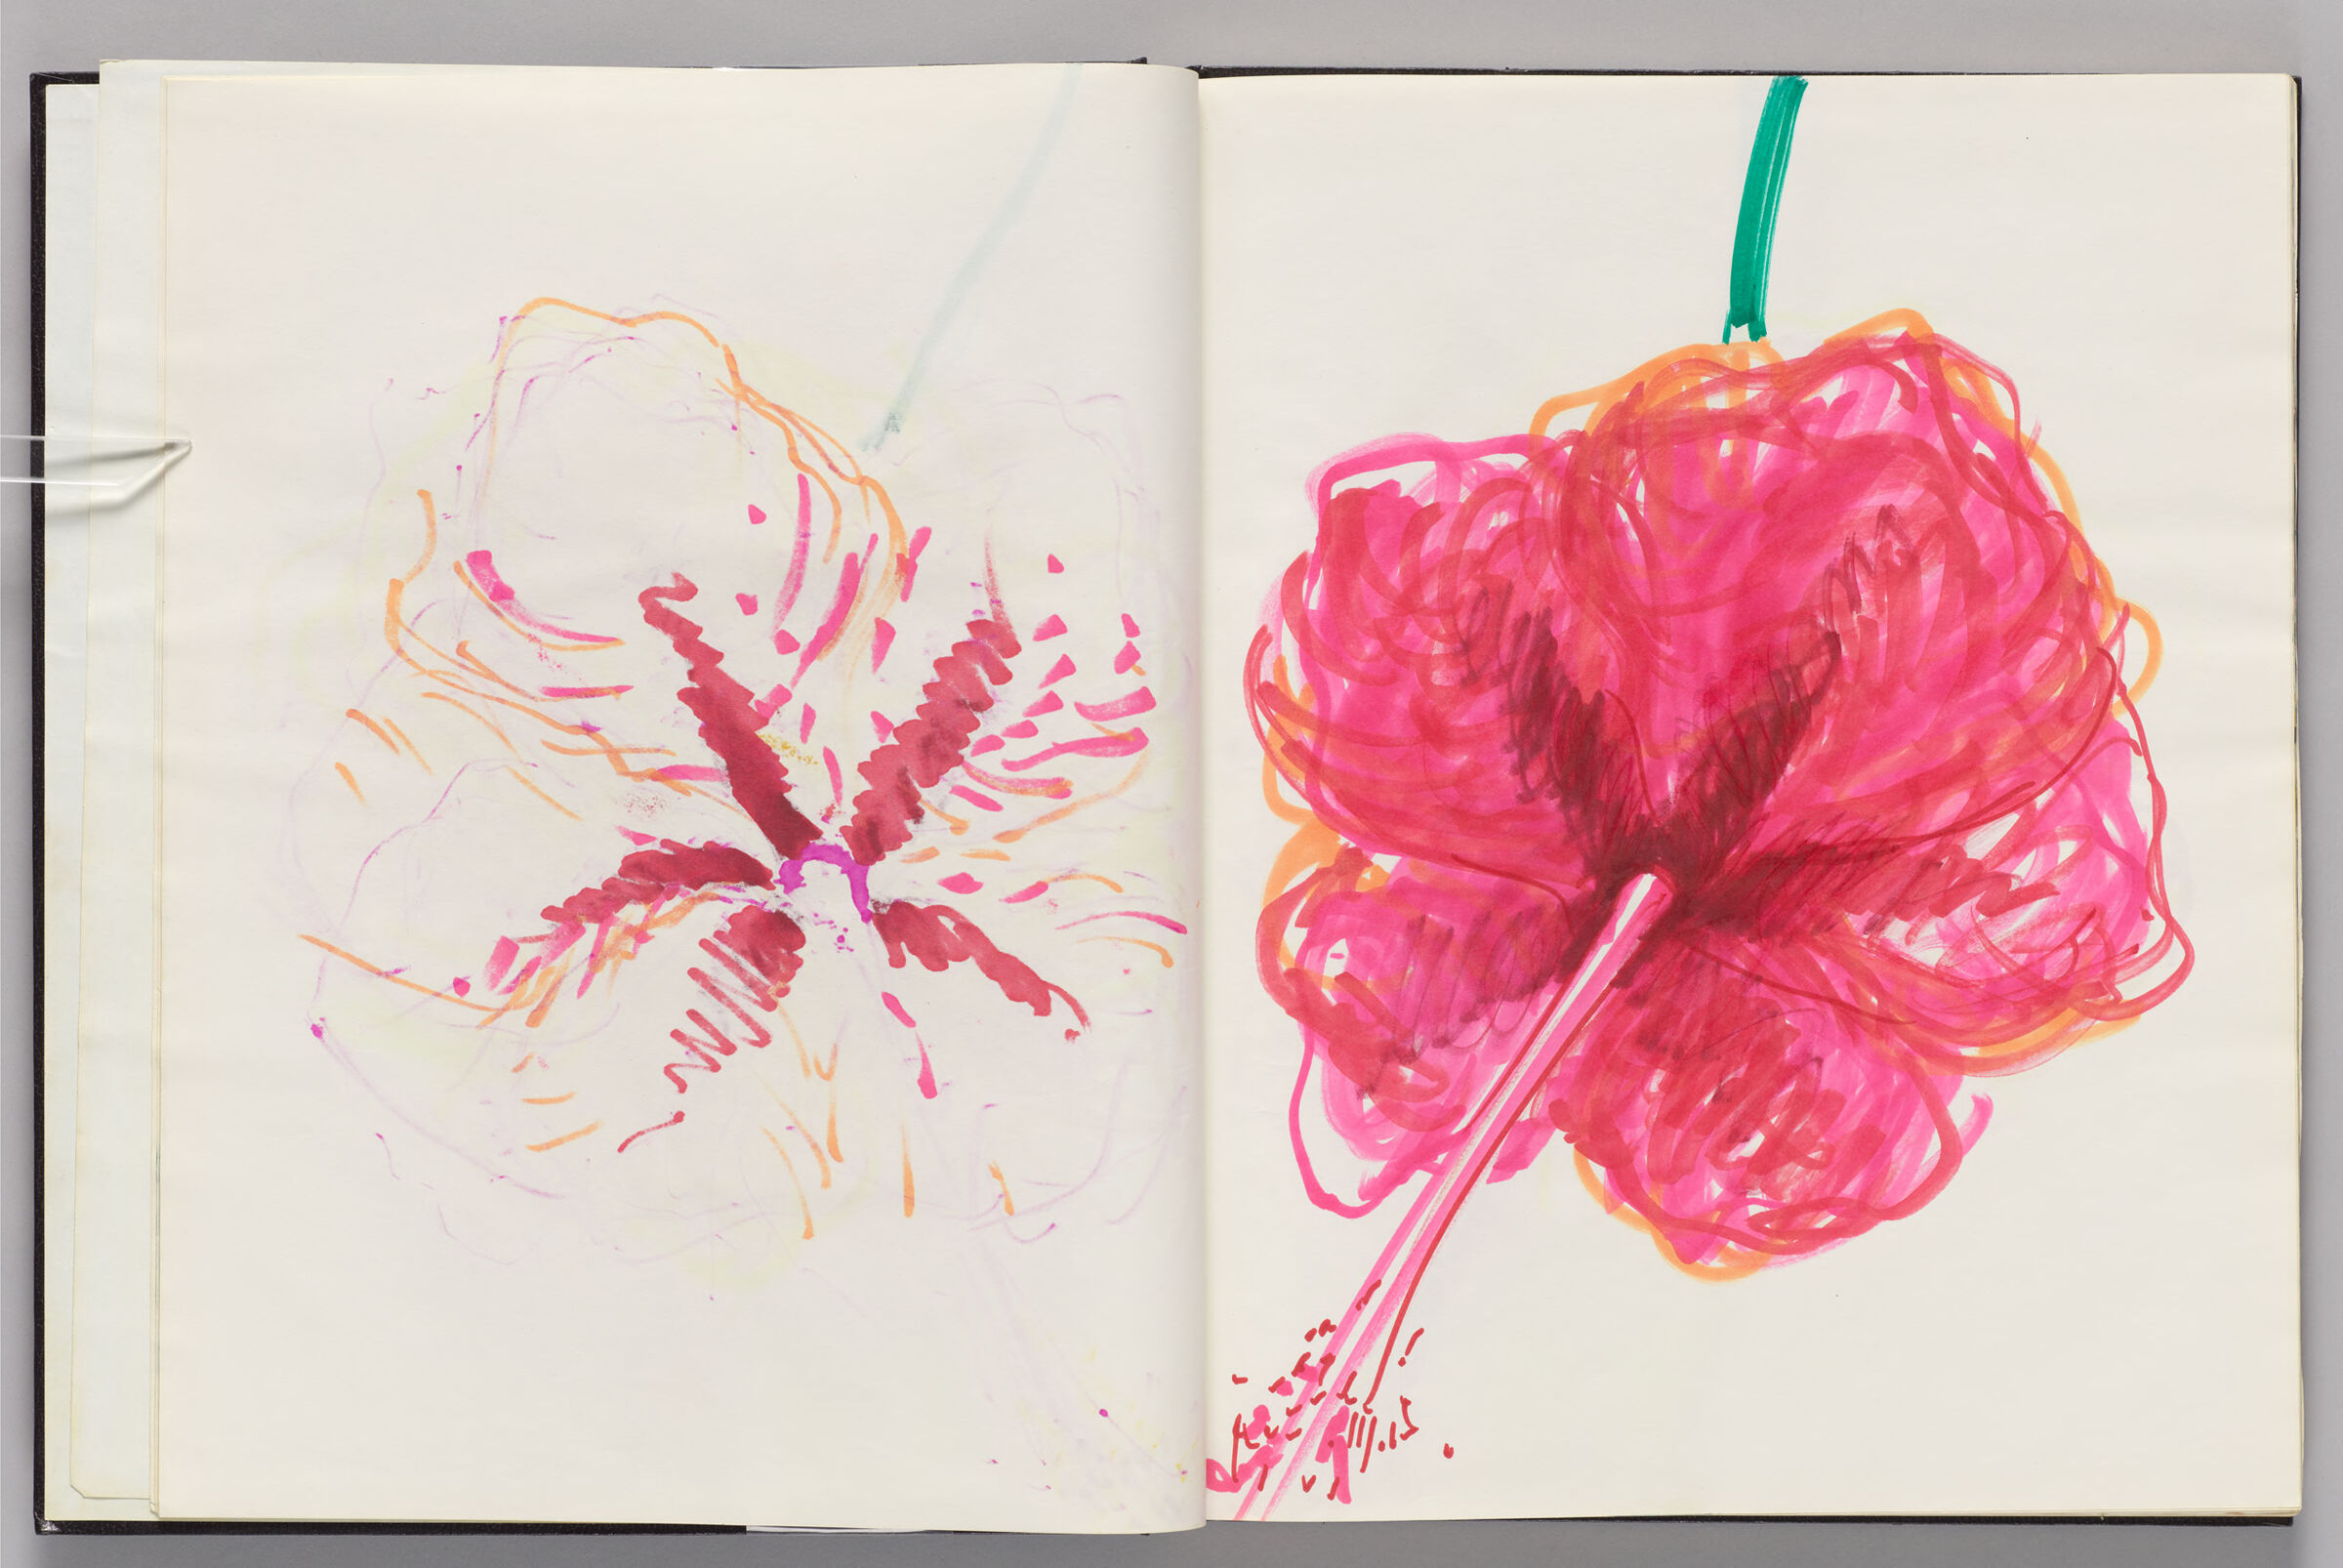 Untitled (Bleed-Through Of Previous Page, Left Page); Untitled (Hibiscus, Right Page)